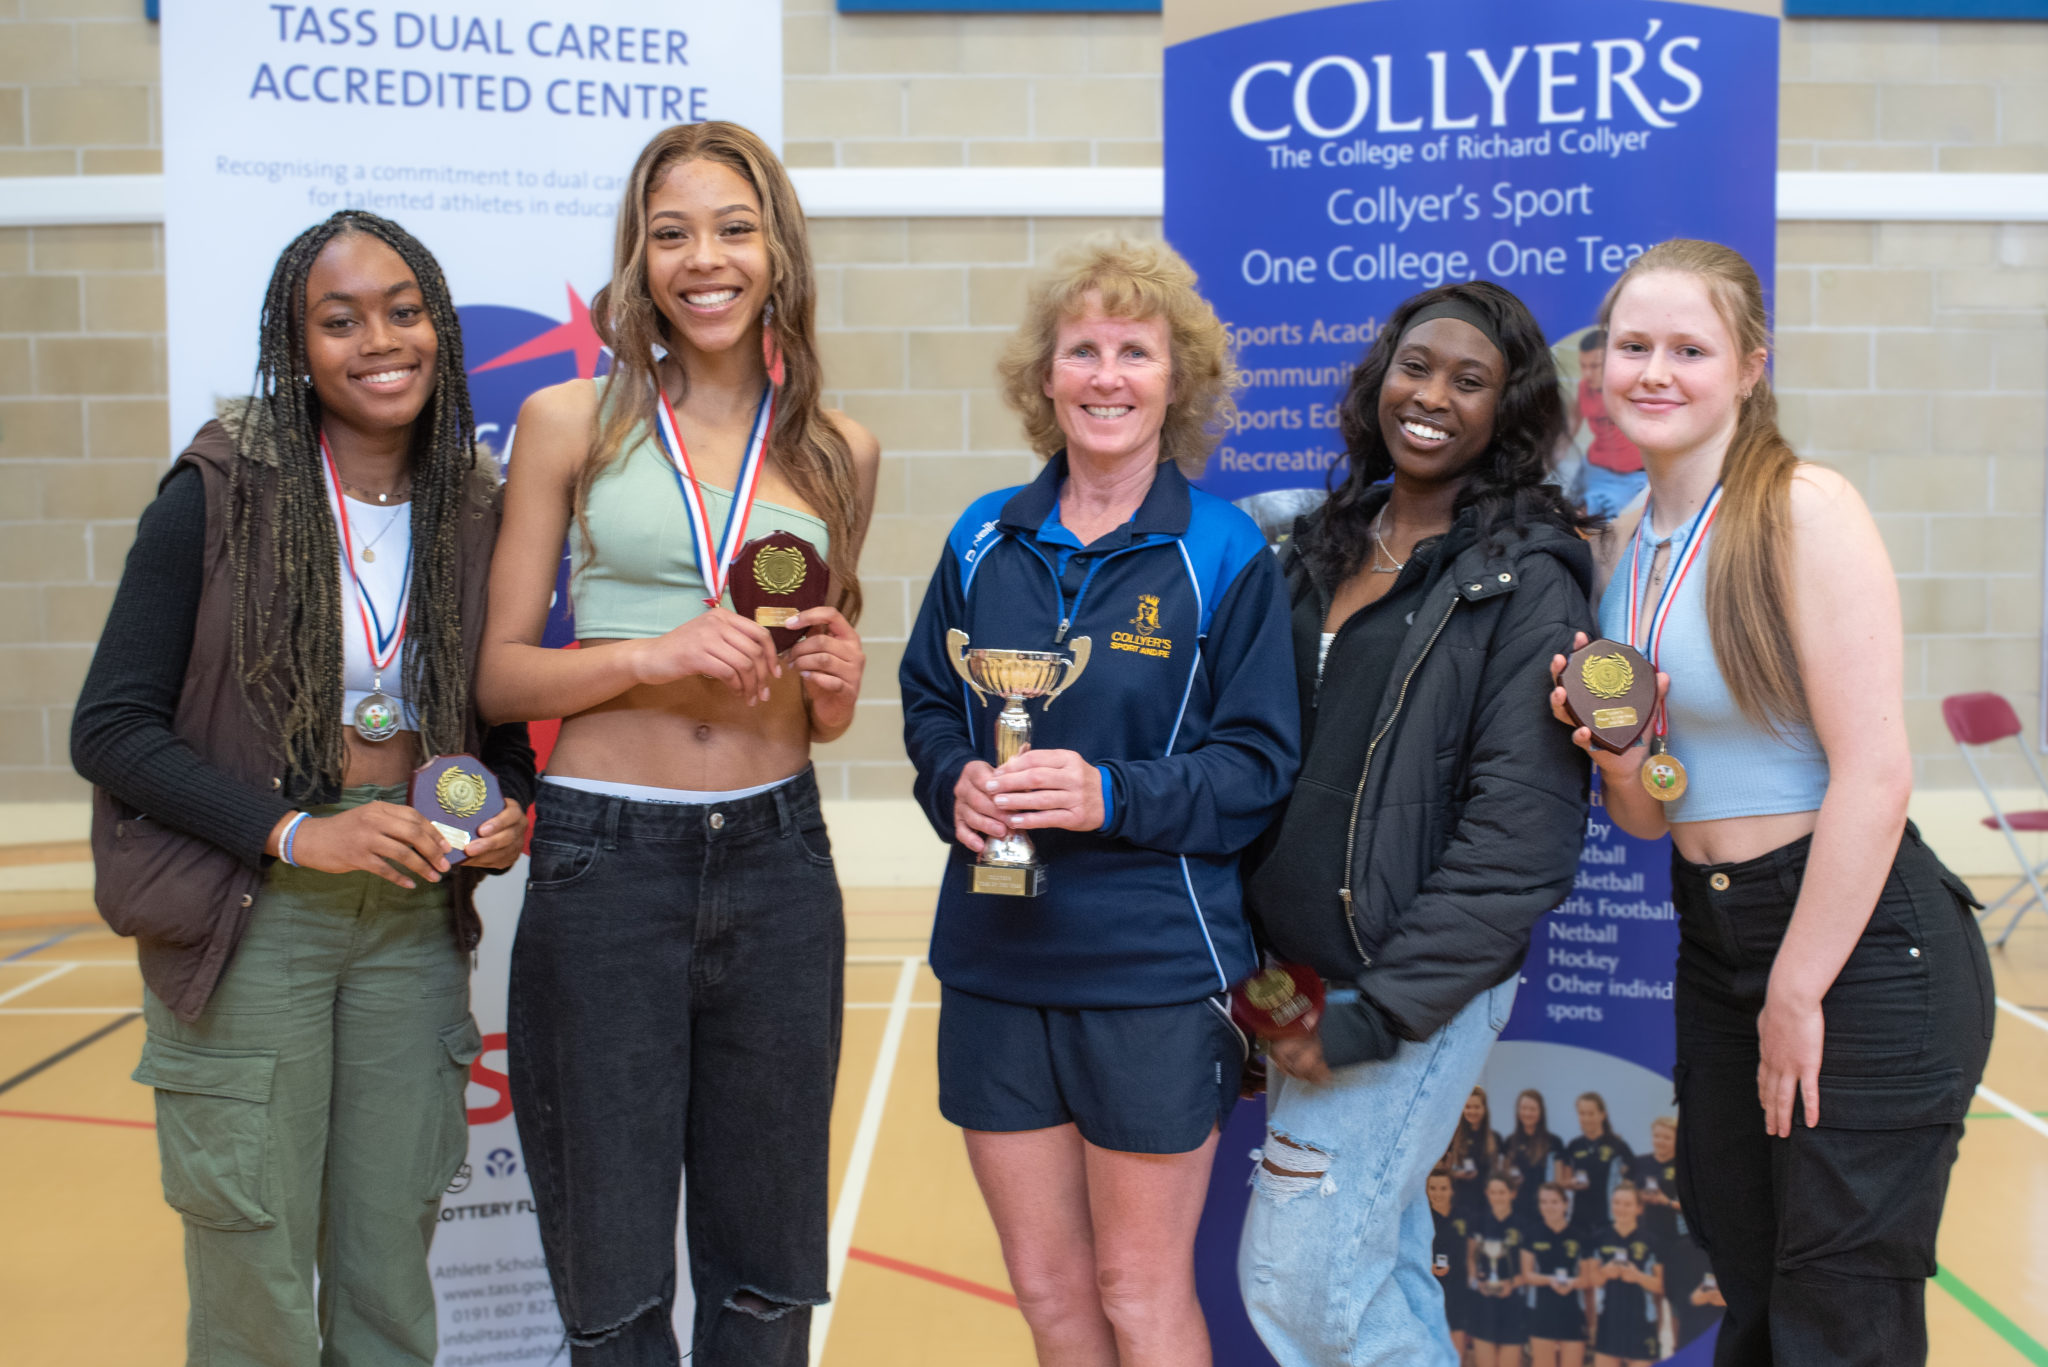 Collyer’s Sports Awards